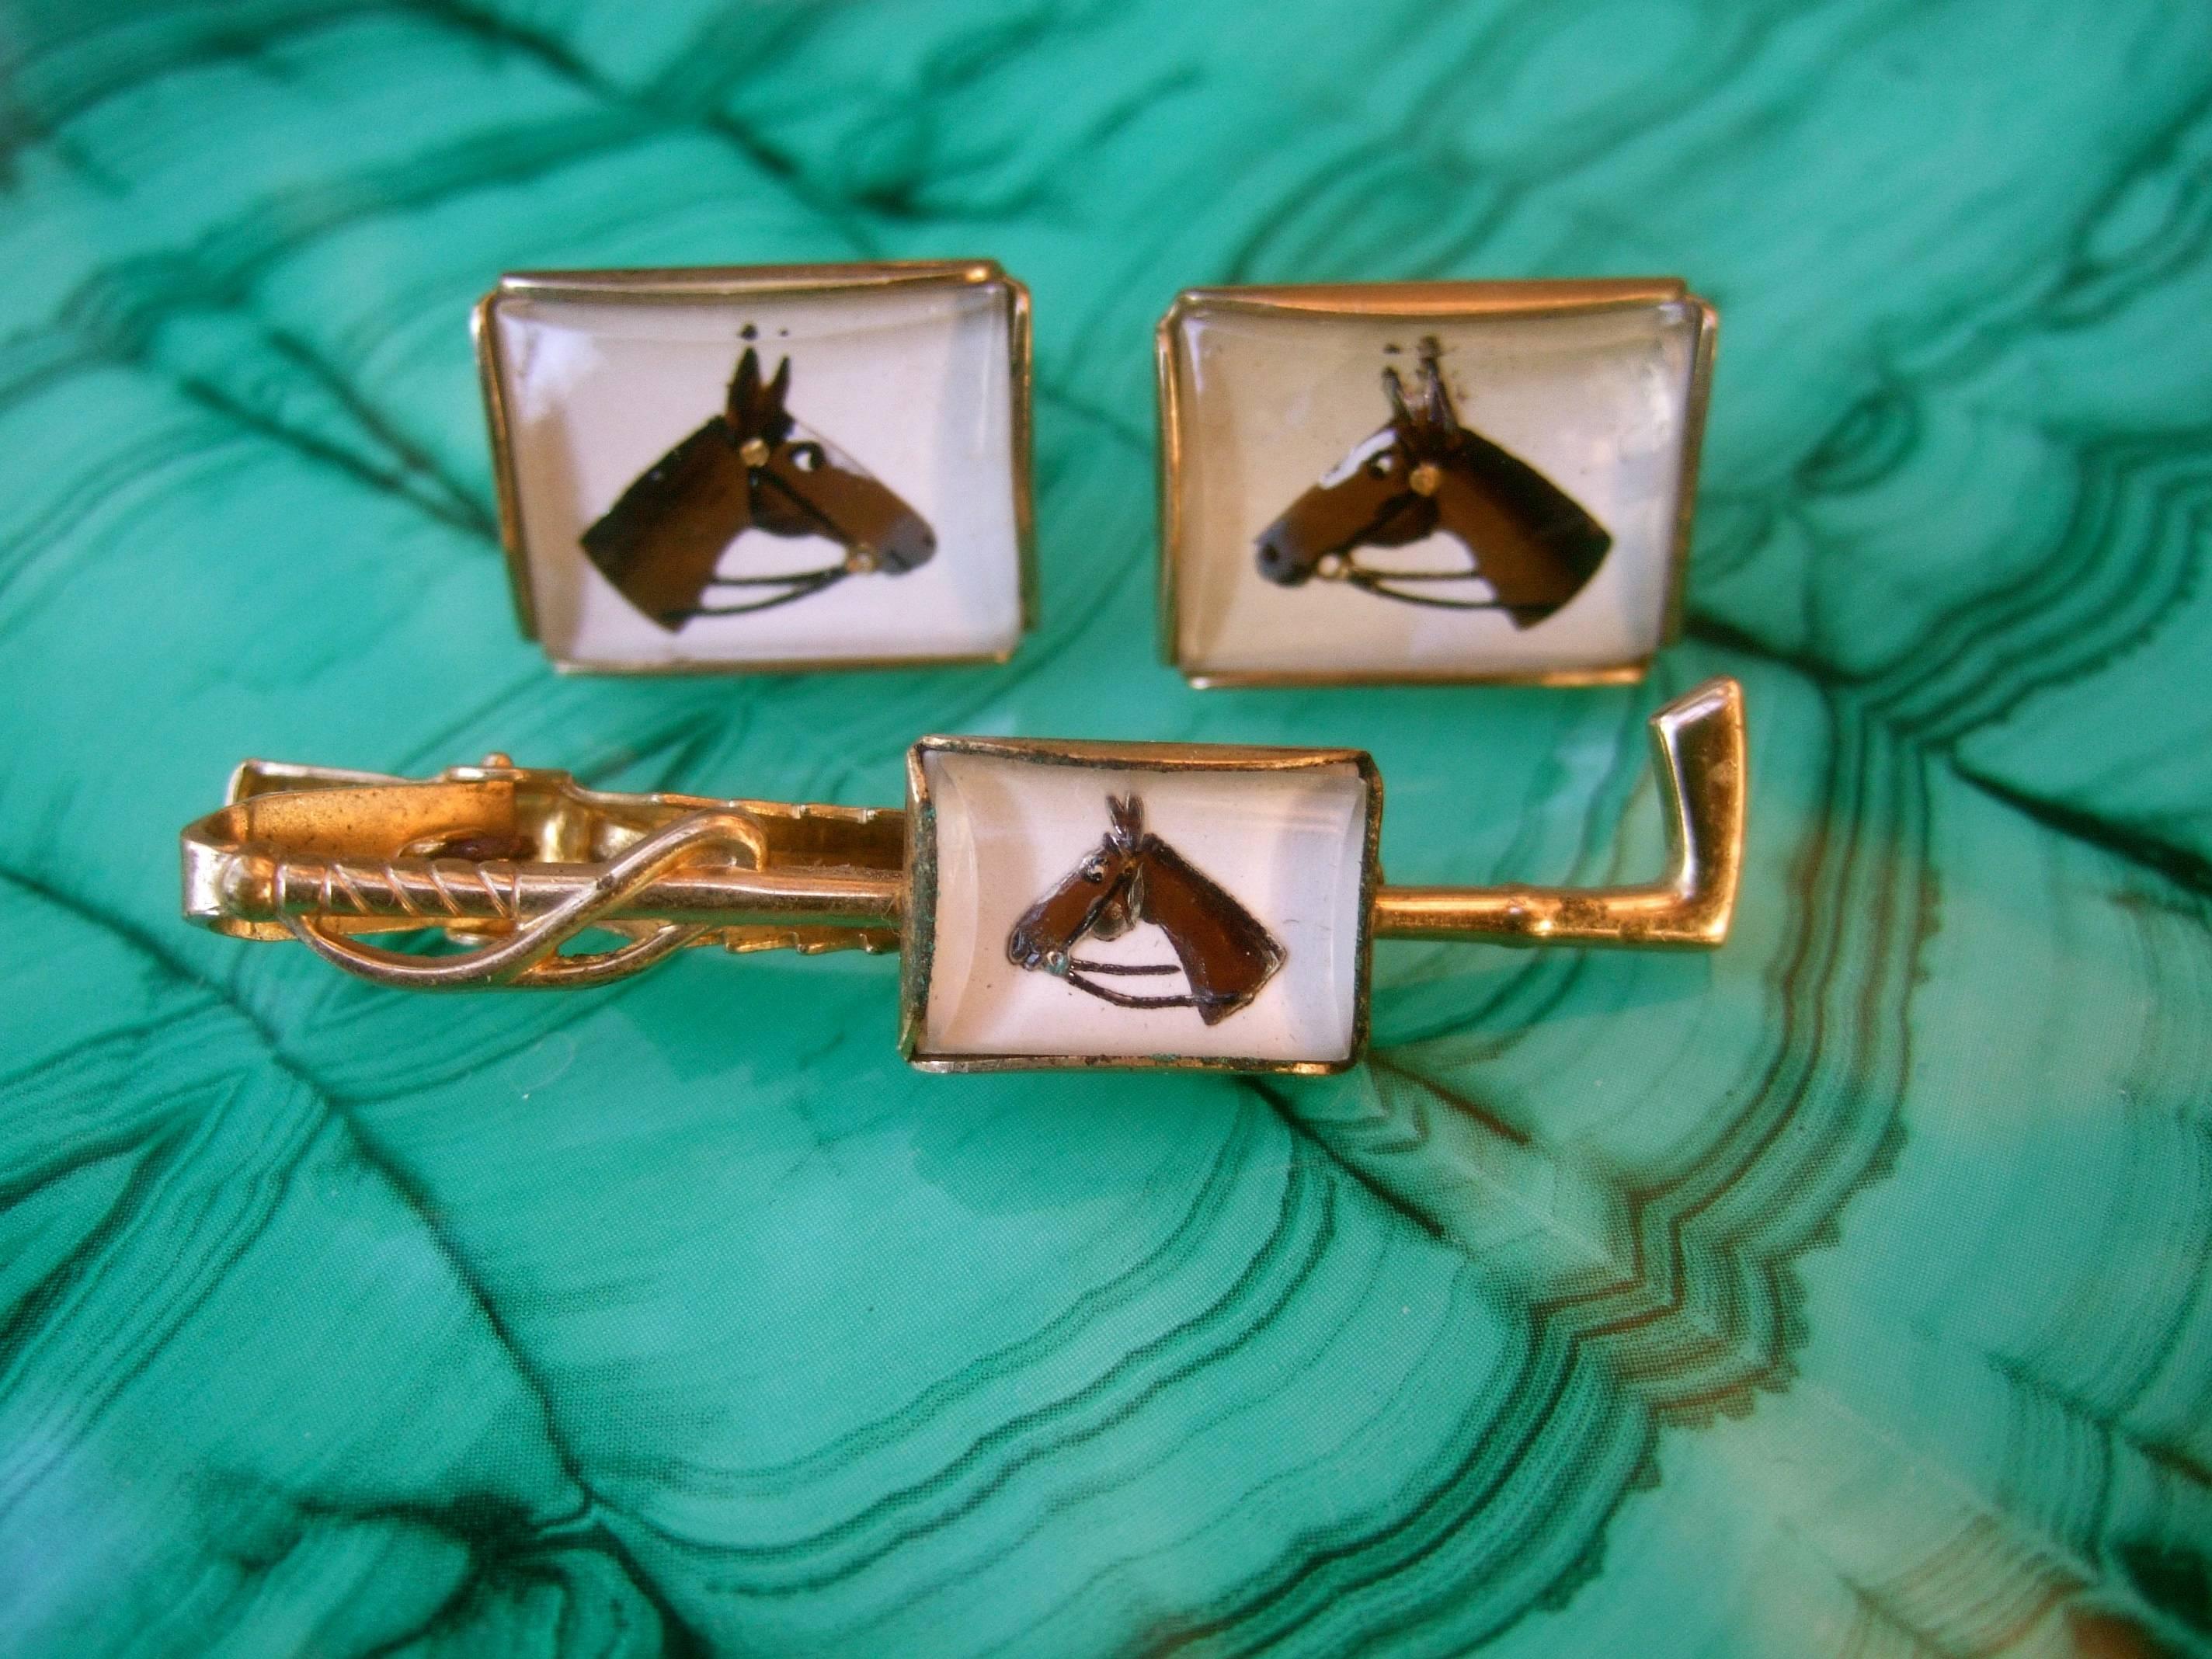 1950s Glass equine tie bar and cufflinks set 
The stylish vintage cufflinks and tie bar are designed
with the silhouette of a horse figure encased under glass

The tie clip is designed in the shape of a riding crop
Designed with gilt plated metal 